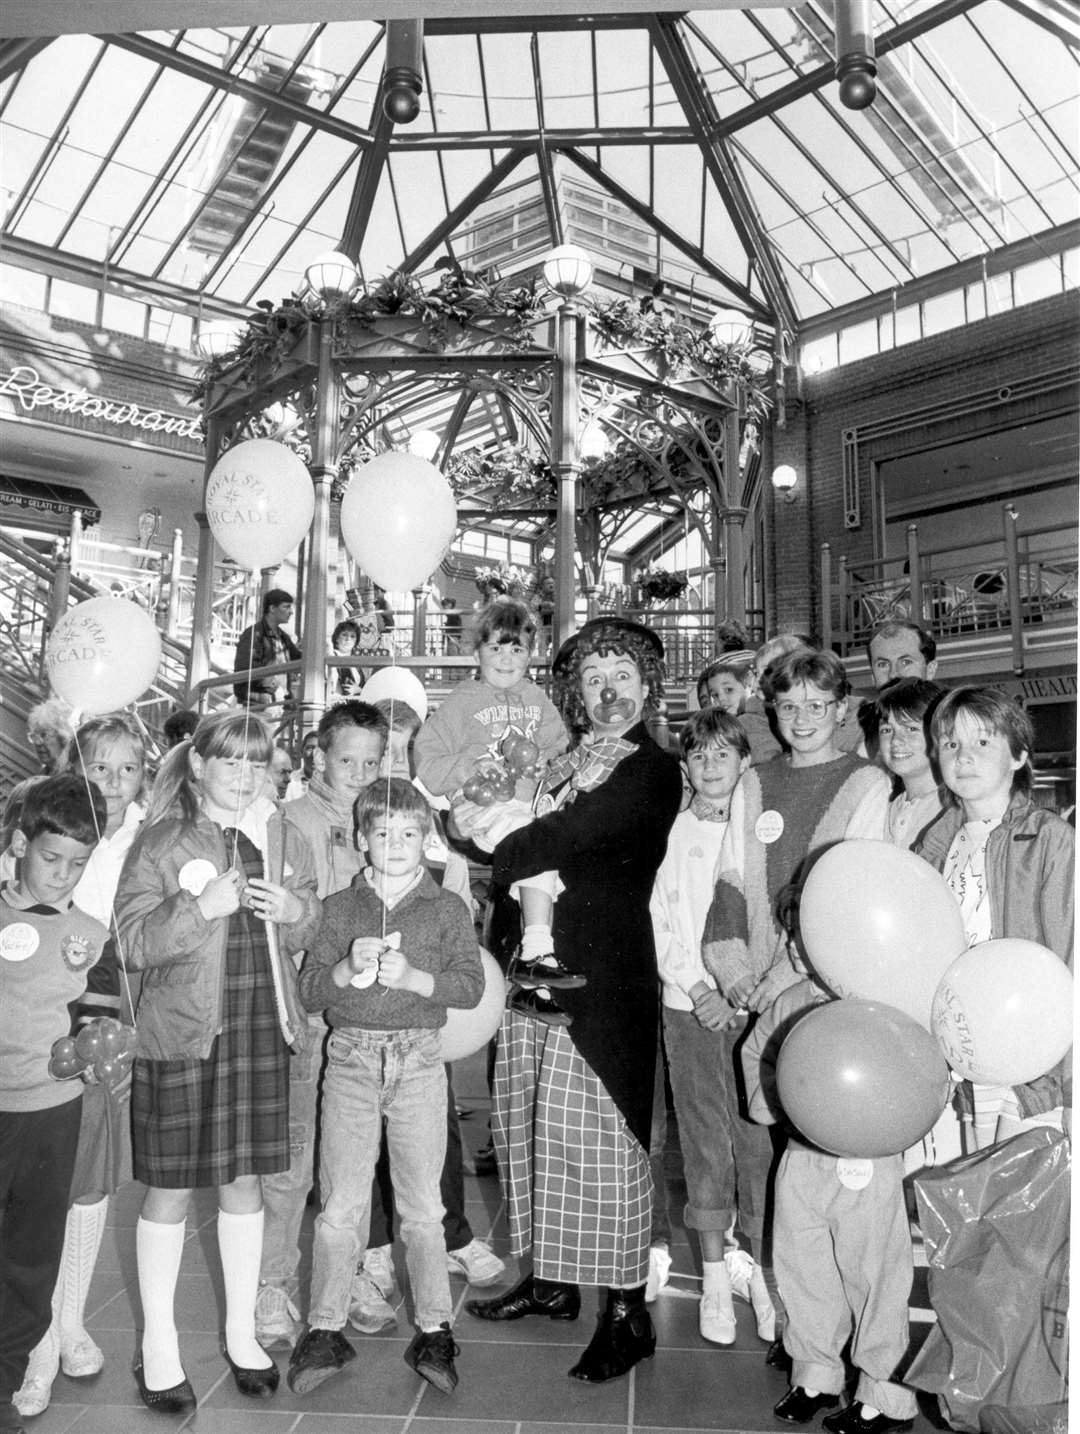 Clowning around at the Royal Star Arcade in Maidstone in 1987